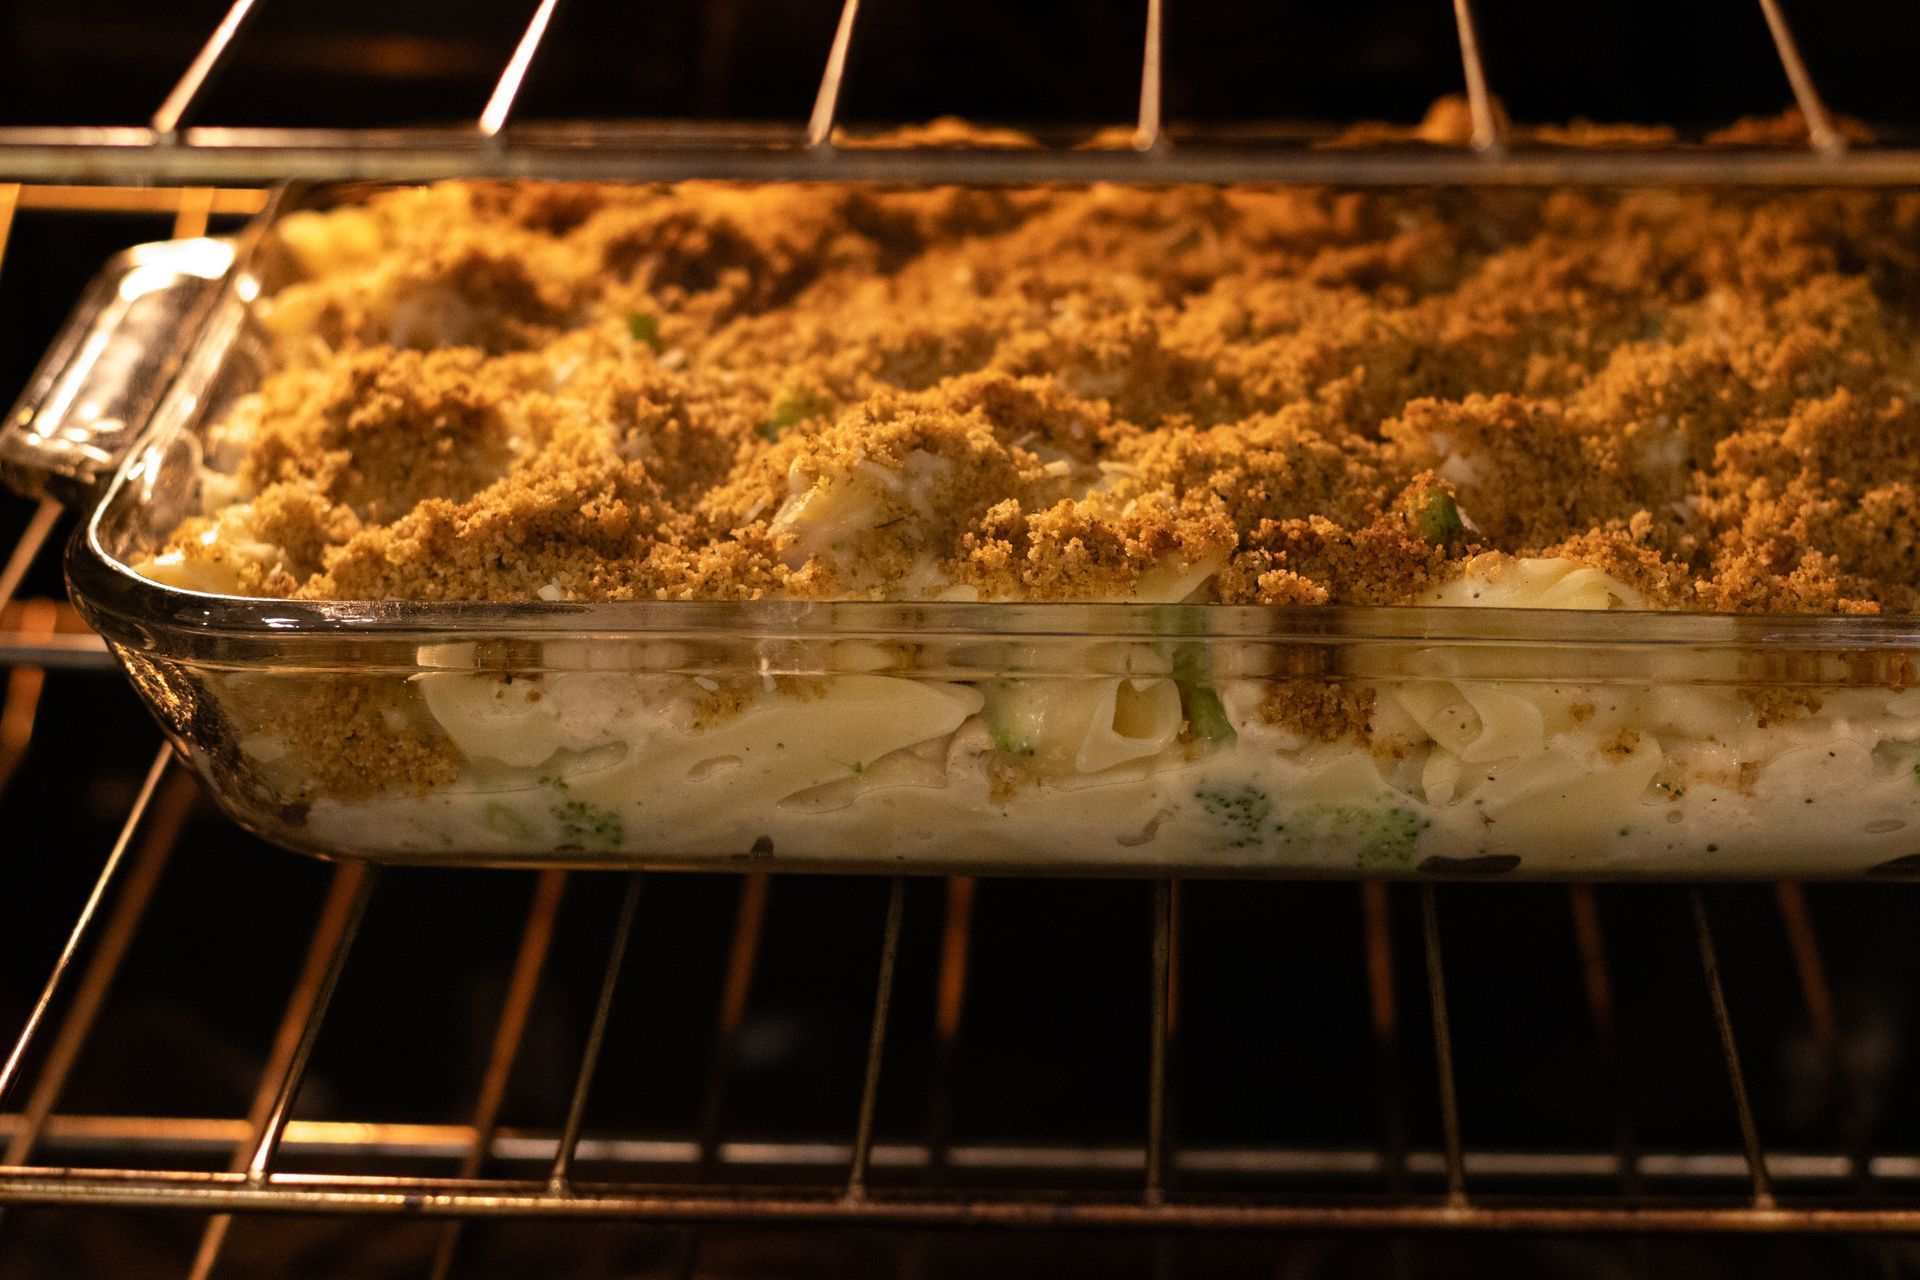 Cooking tray filled with chicken and broccoli Alfredo bake in the oven